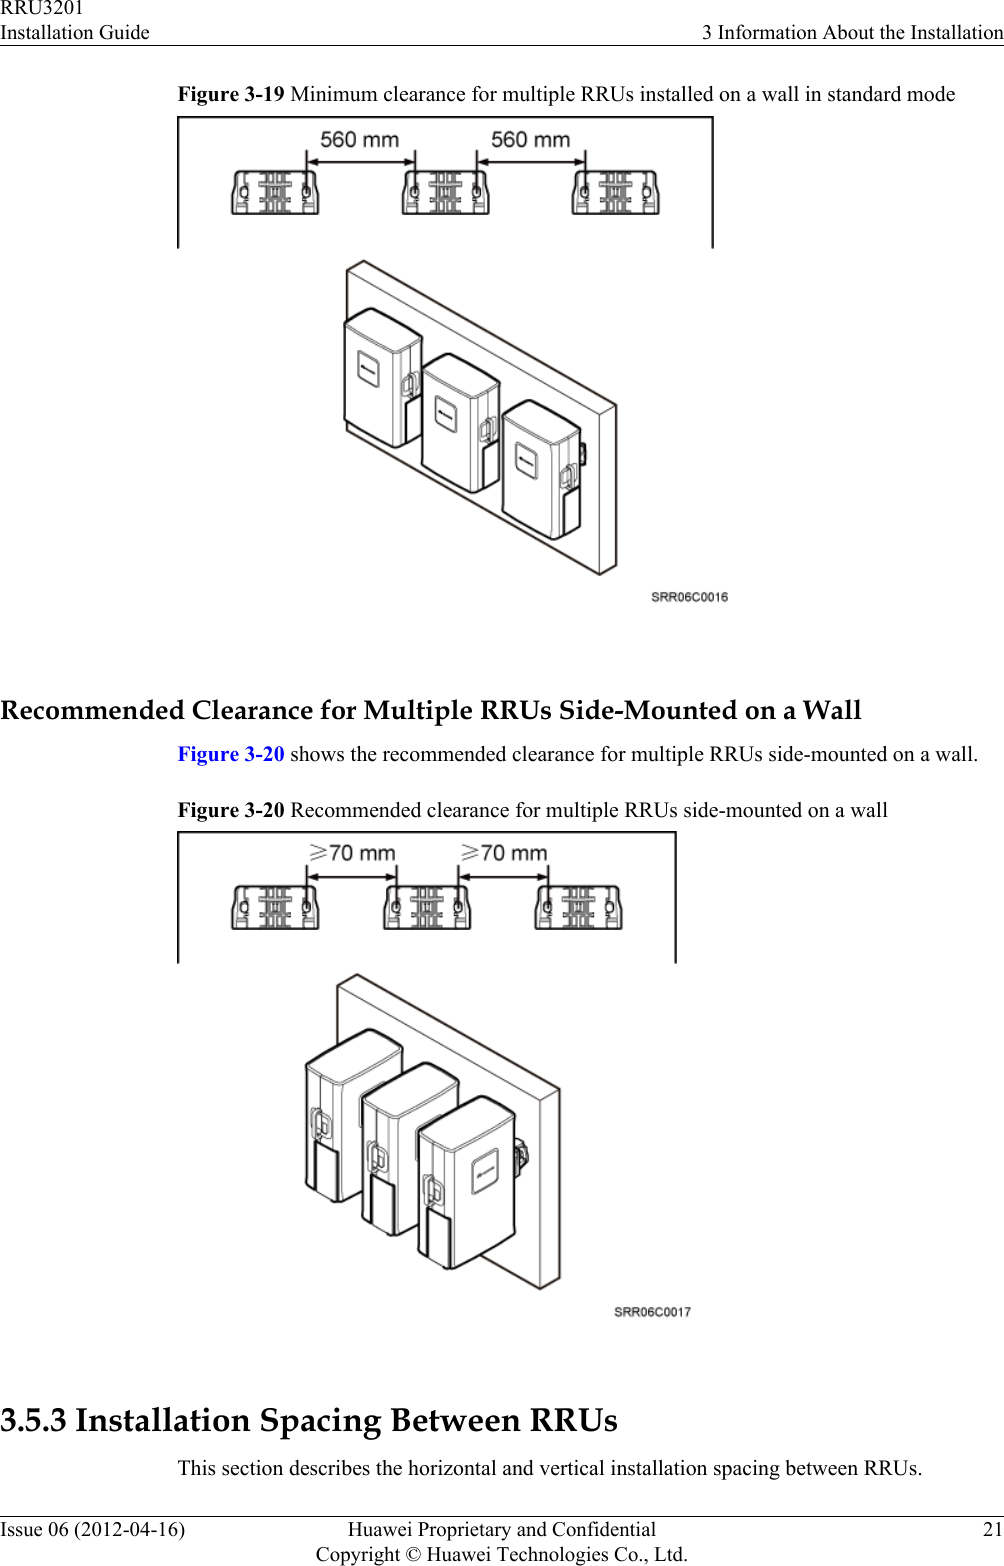 Figure 3-19 Minimum clearance for multiple RRUs installed on a wall in standard mode Recommended Clearance for Multiple RRUs Side-Mounted on a WallFigure 3-20 shows the recommended clearance for multiple RRUs side-mounted on a wall.Figure 3-20 Recommended clearance for multiple RRUs side-mounted on a wall 3.5.3 Installation Spacing Between RRUsThis section describes the horizontal and vertical installation spacing between RRUs.RRU3201Installation Guide 3 Information About the InstallationIssue 06 (2012-04-16) Huawei Proprietary and ConfidentialCopyright © Huawei Technologies Co., Ltd.21